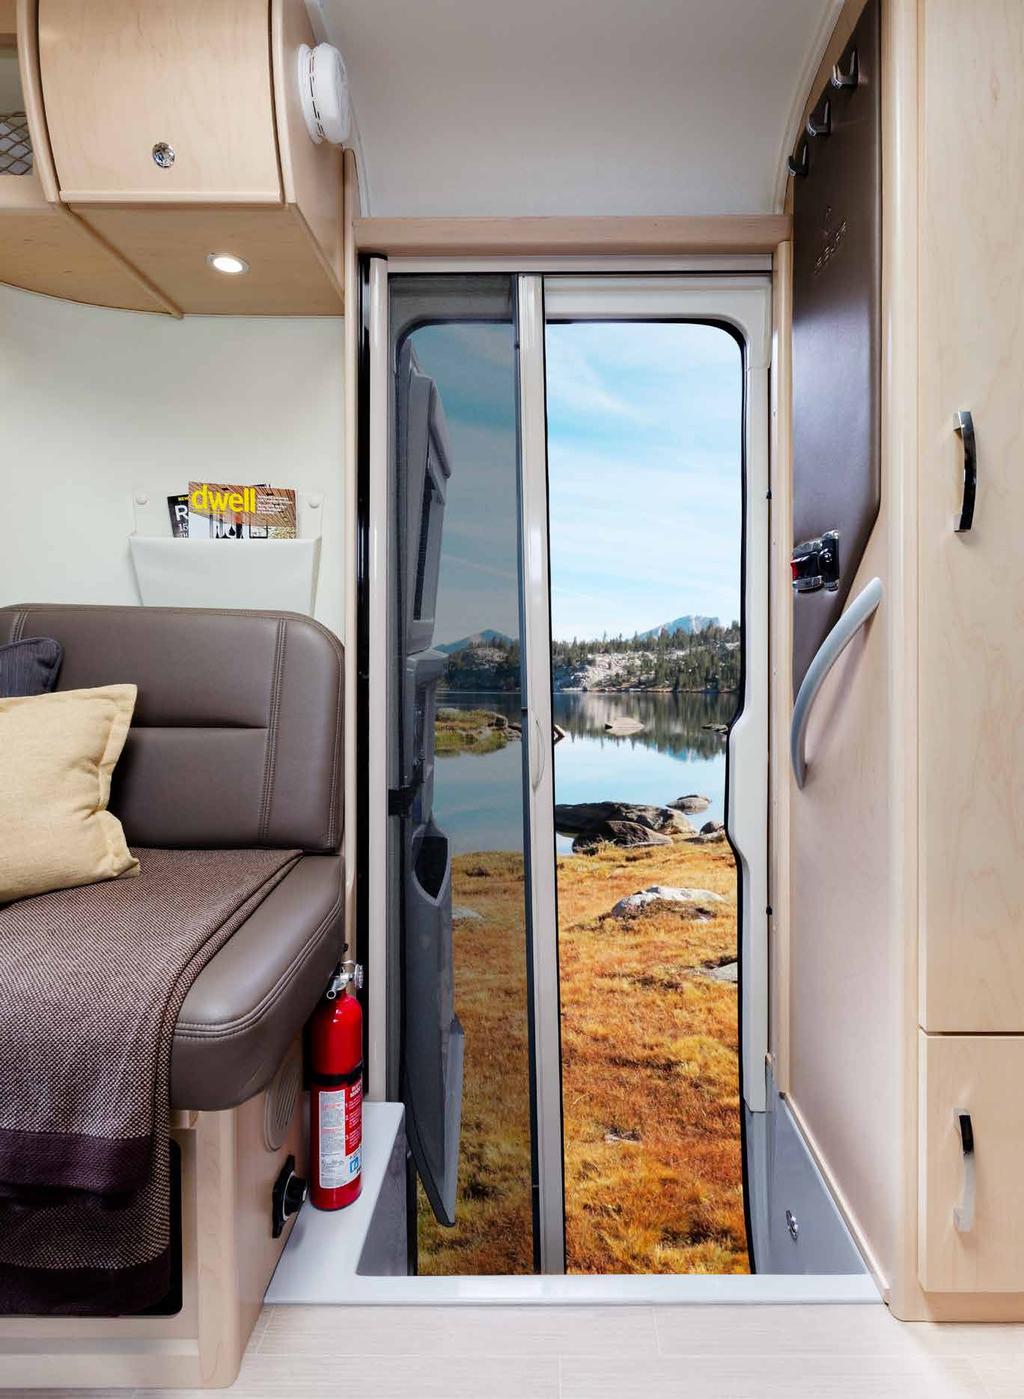 The Serenity and Libero boast a blend of functionality and elegance.